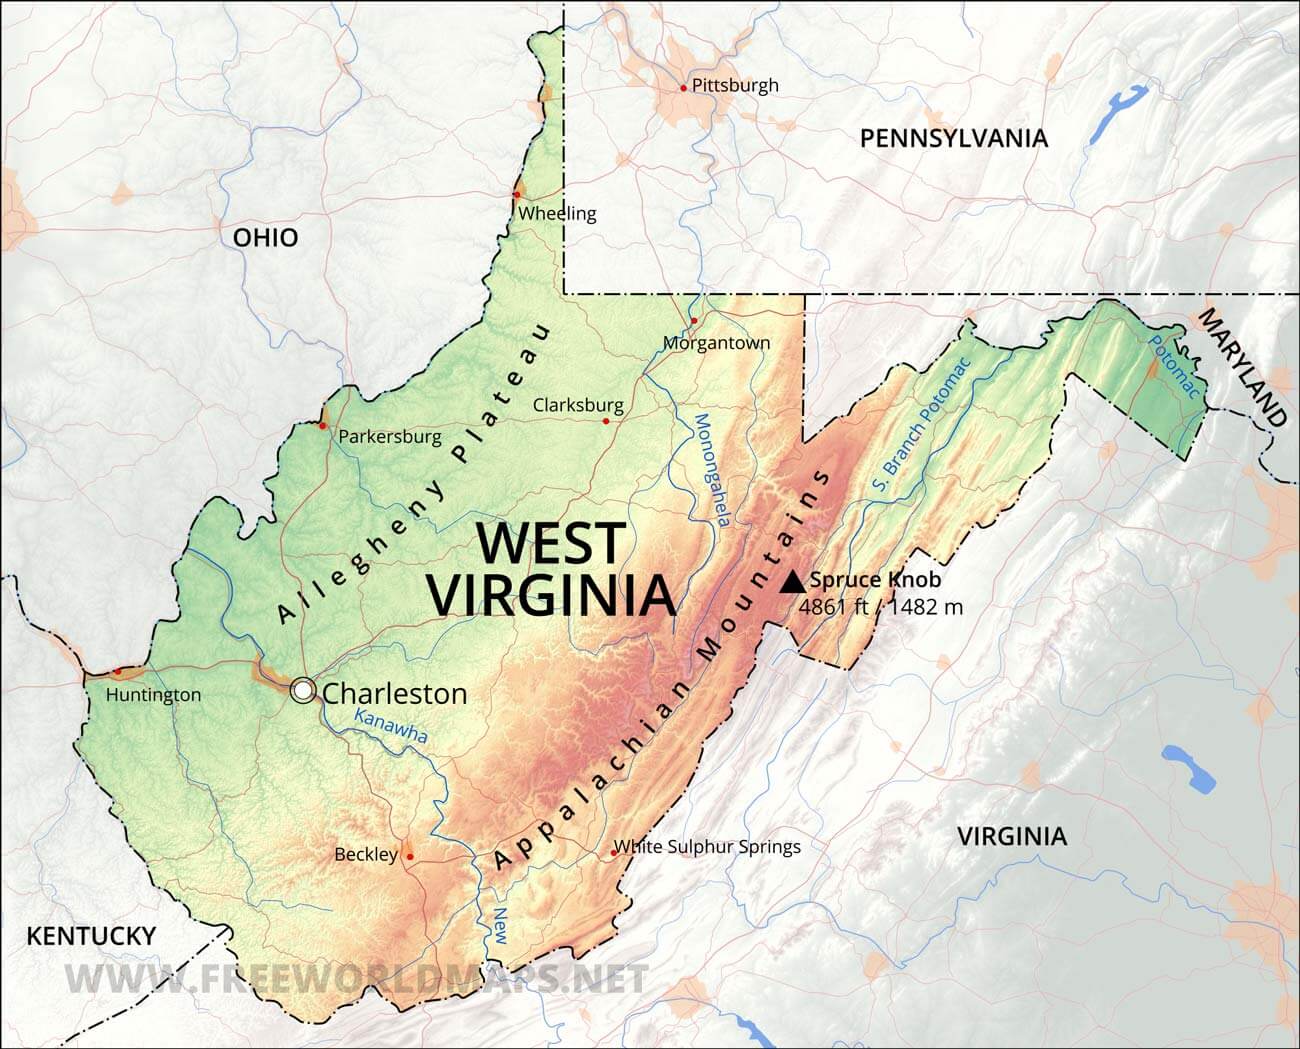 Physical Map Of West Virginia